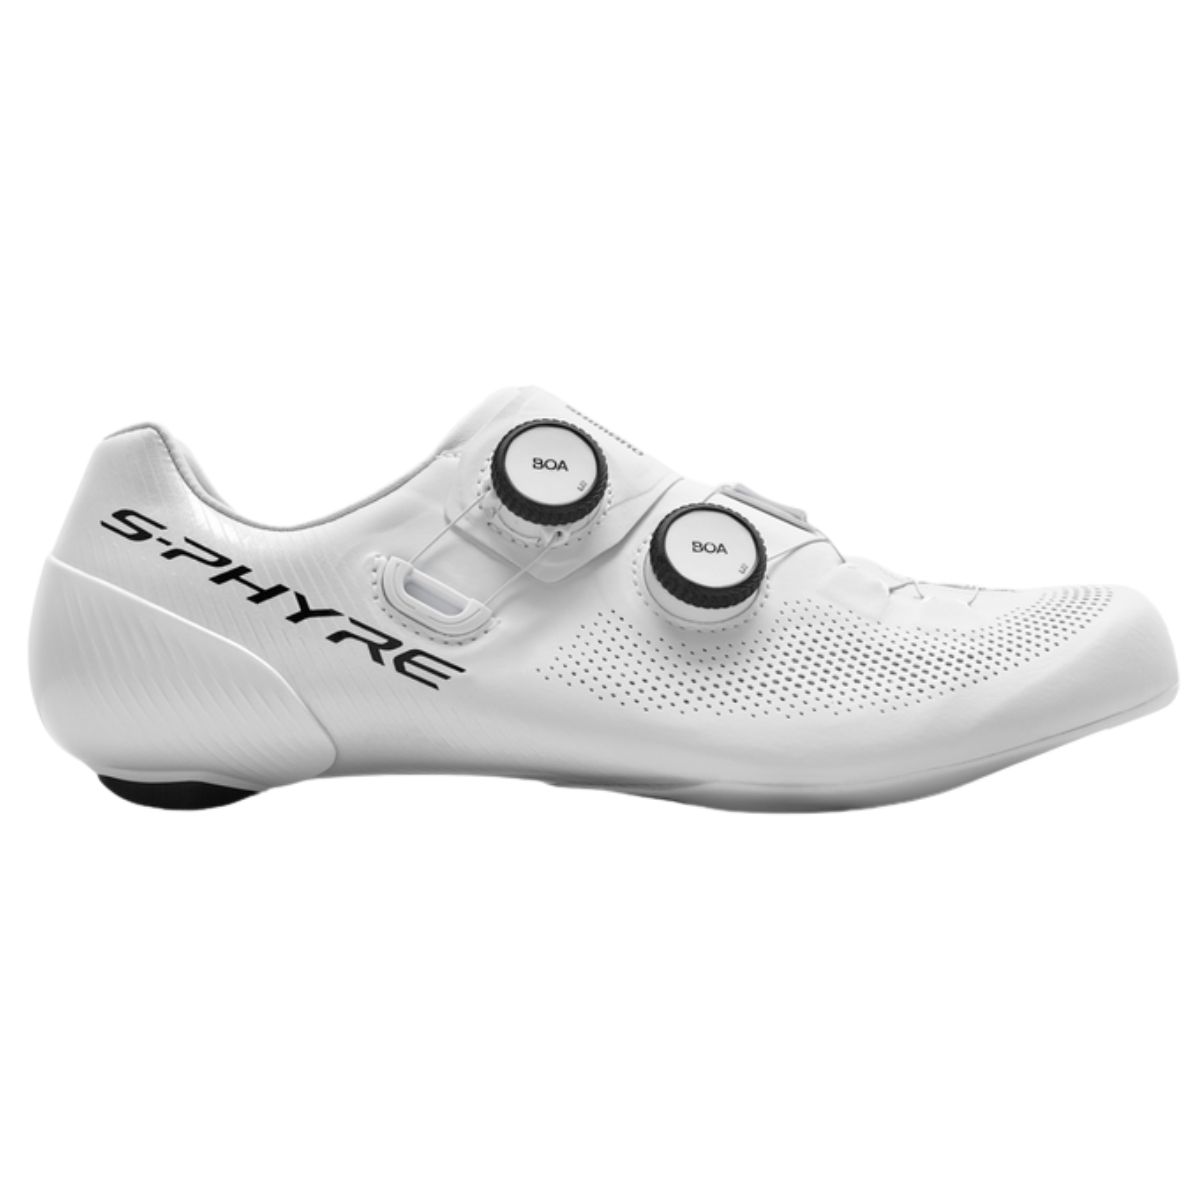 Chaussures Shimano RC903 Sphyre Blanc 41.5